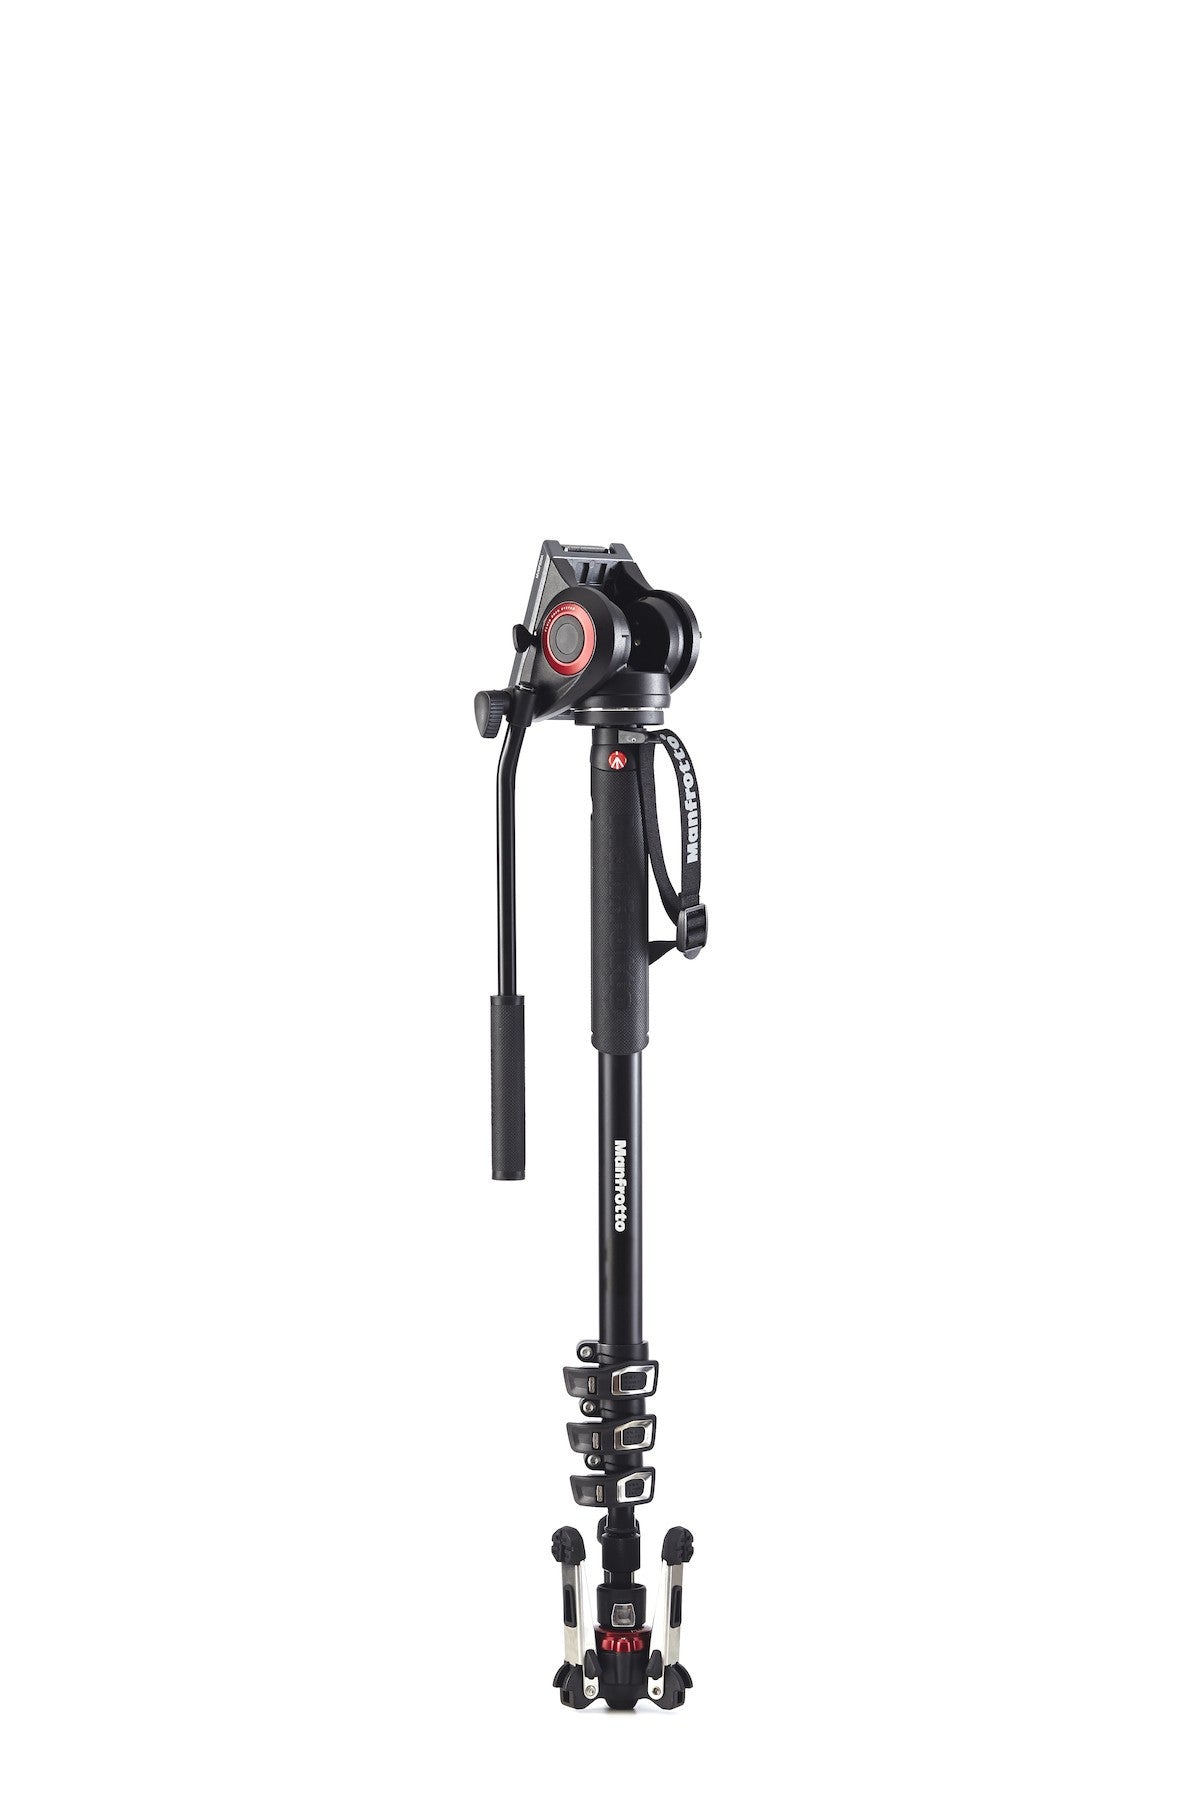 Manfrotto Video MVMXPRO500US Xpro Aluminum Video Monopod with 500 Series Video Head, tripods video monopods, Manfrotto - Pictureline  - 3